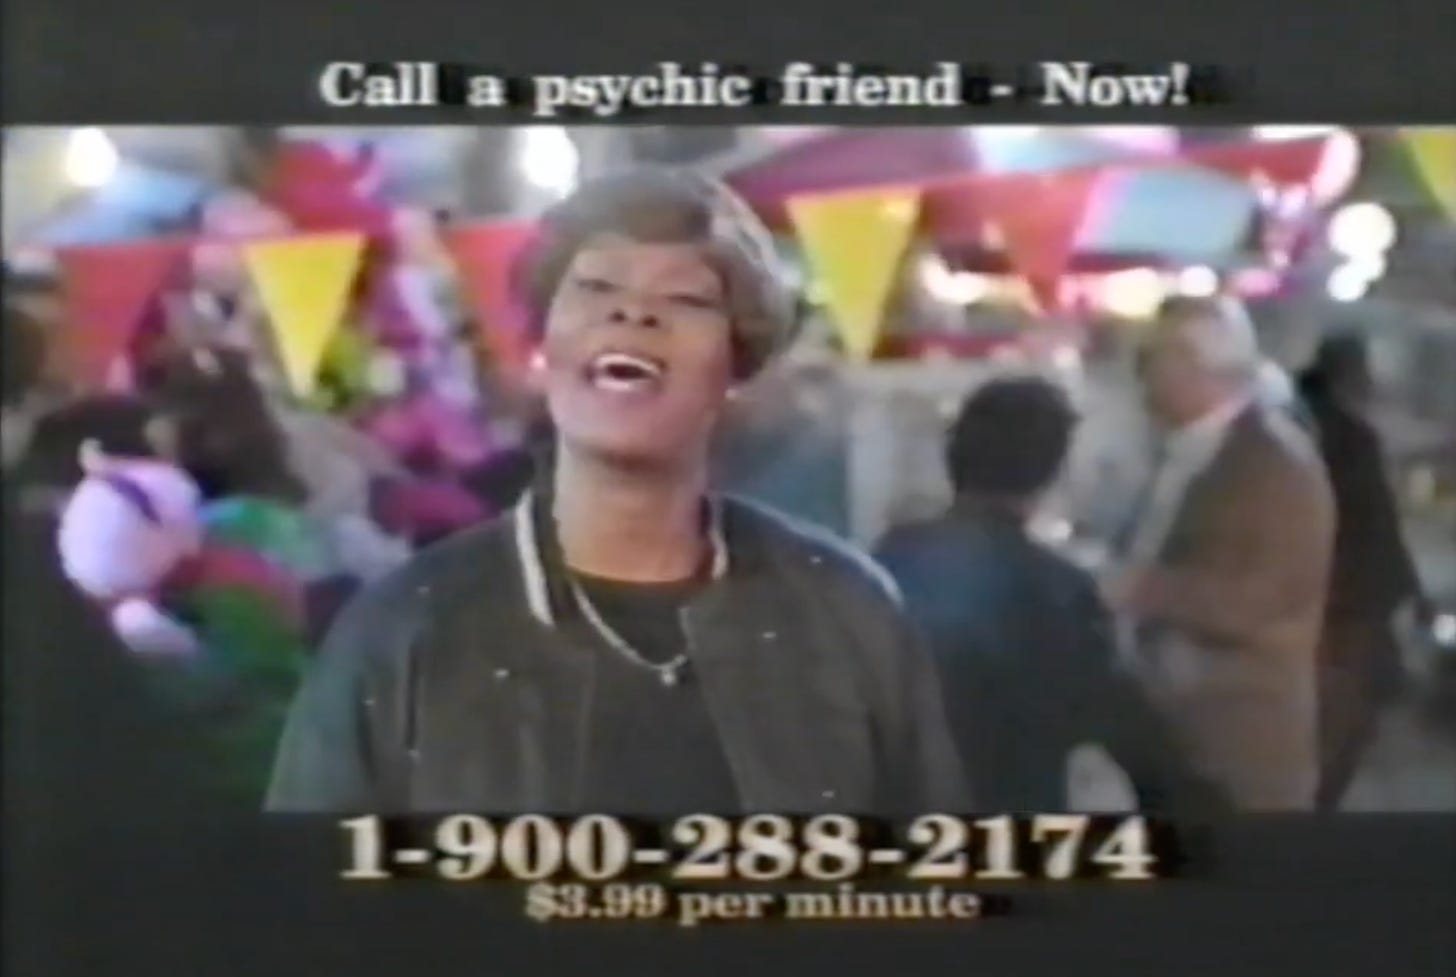 dionne warwick's psychic friends network at